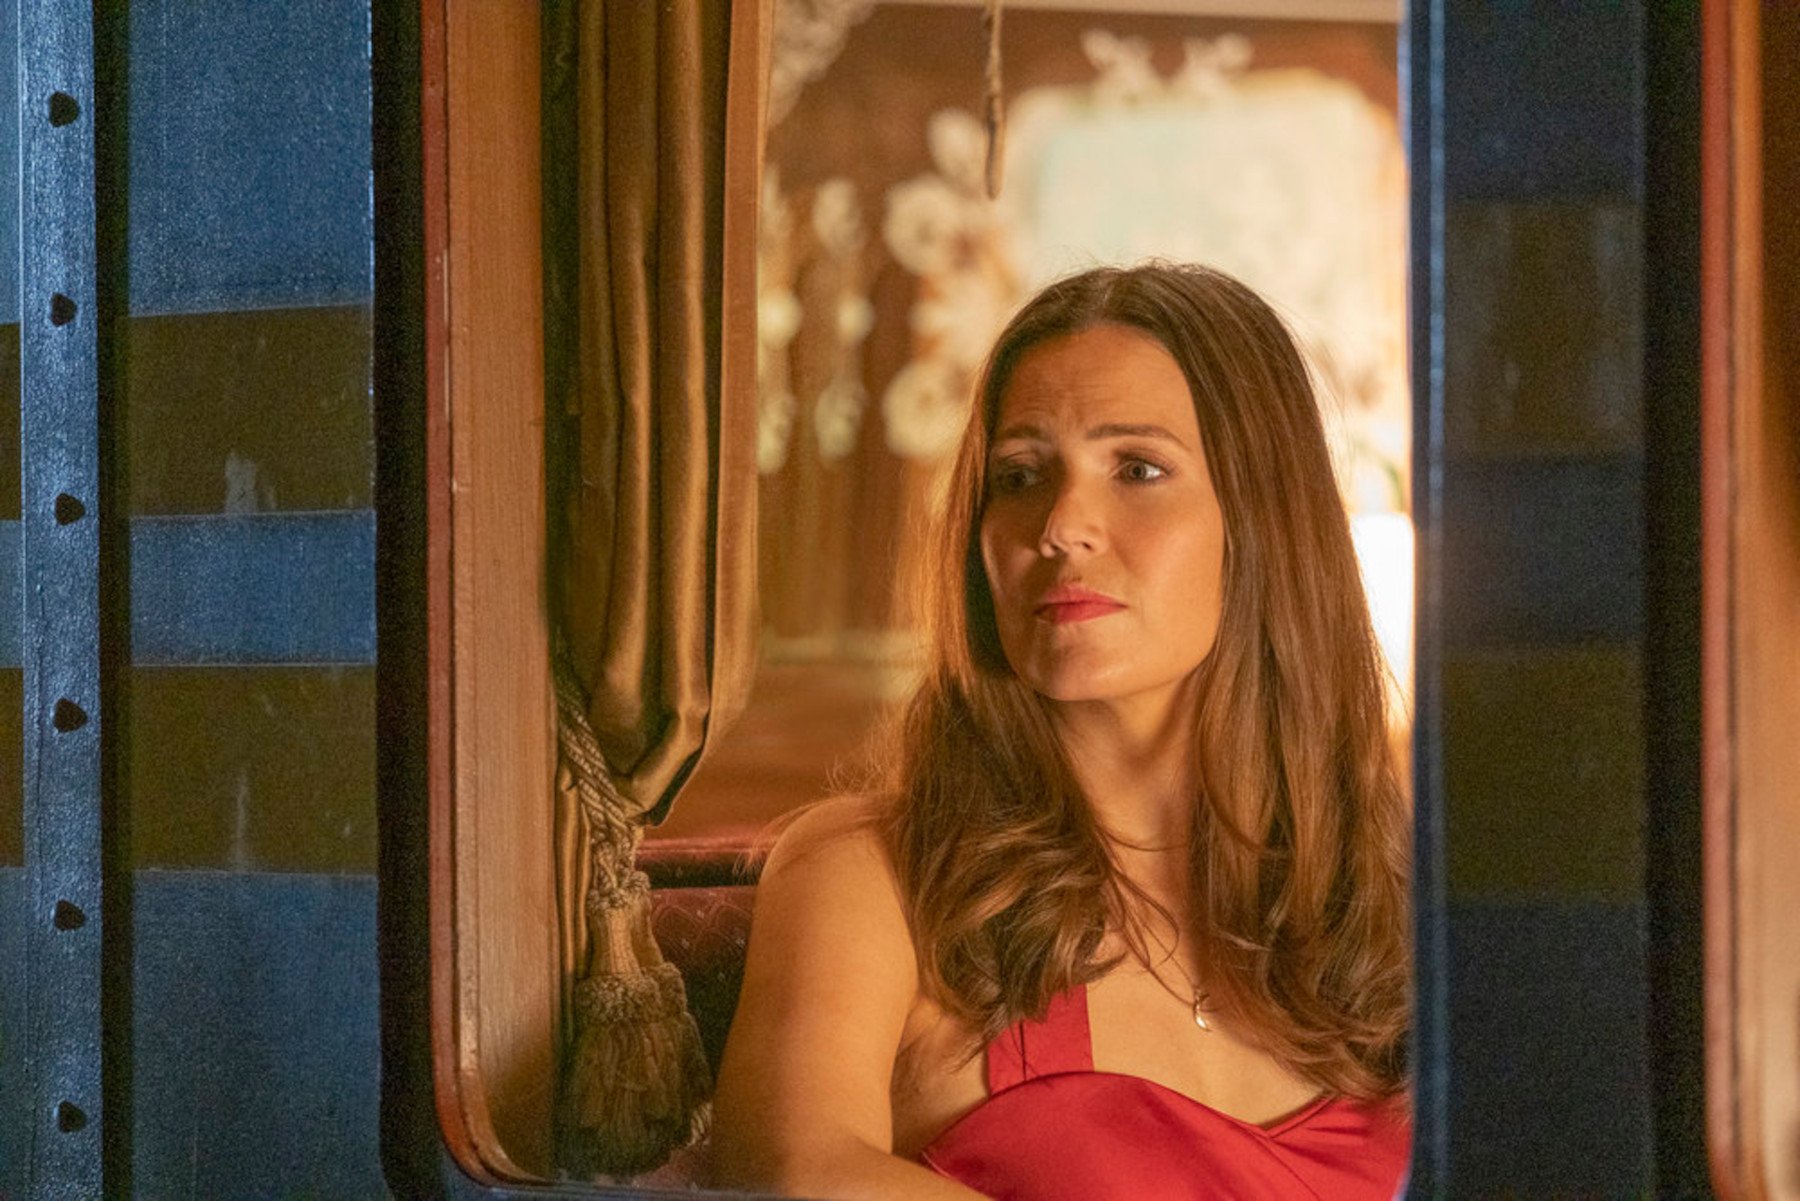 Mandy Moore as Rebecca Pearson in 'This Is Us' Season 6 Episode 17. She's wearing a red dress and staring out a window.